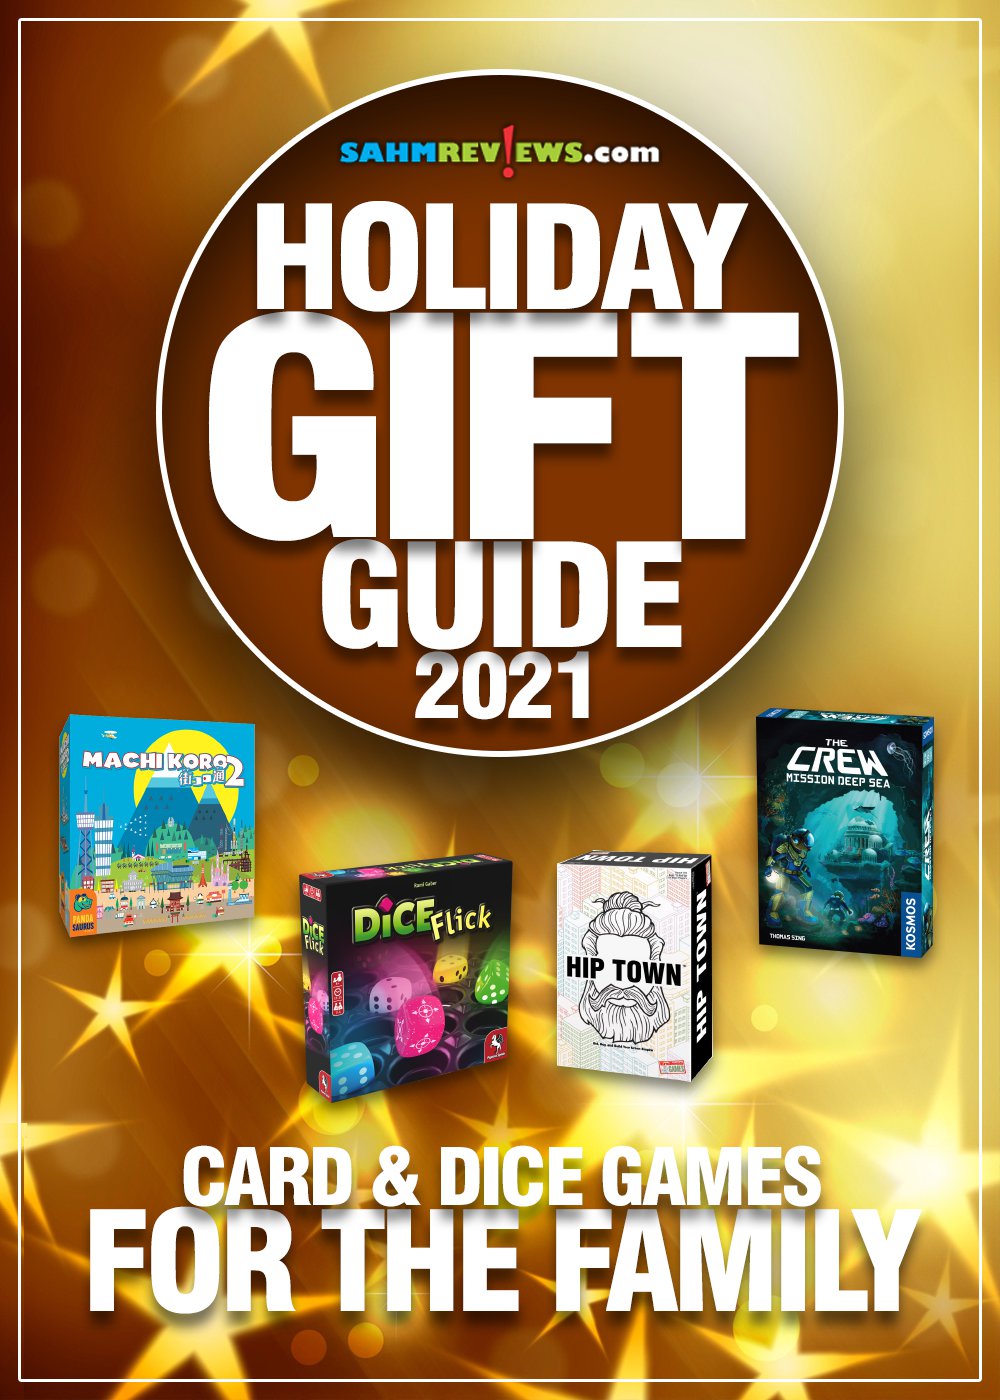 Looking for gift ideas? Games are great for bonding, entertainment and education. Our annual Gift Guide features ideas for card & dice games. - SahmReviews.com